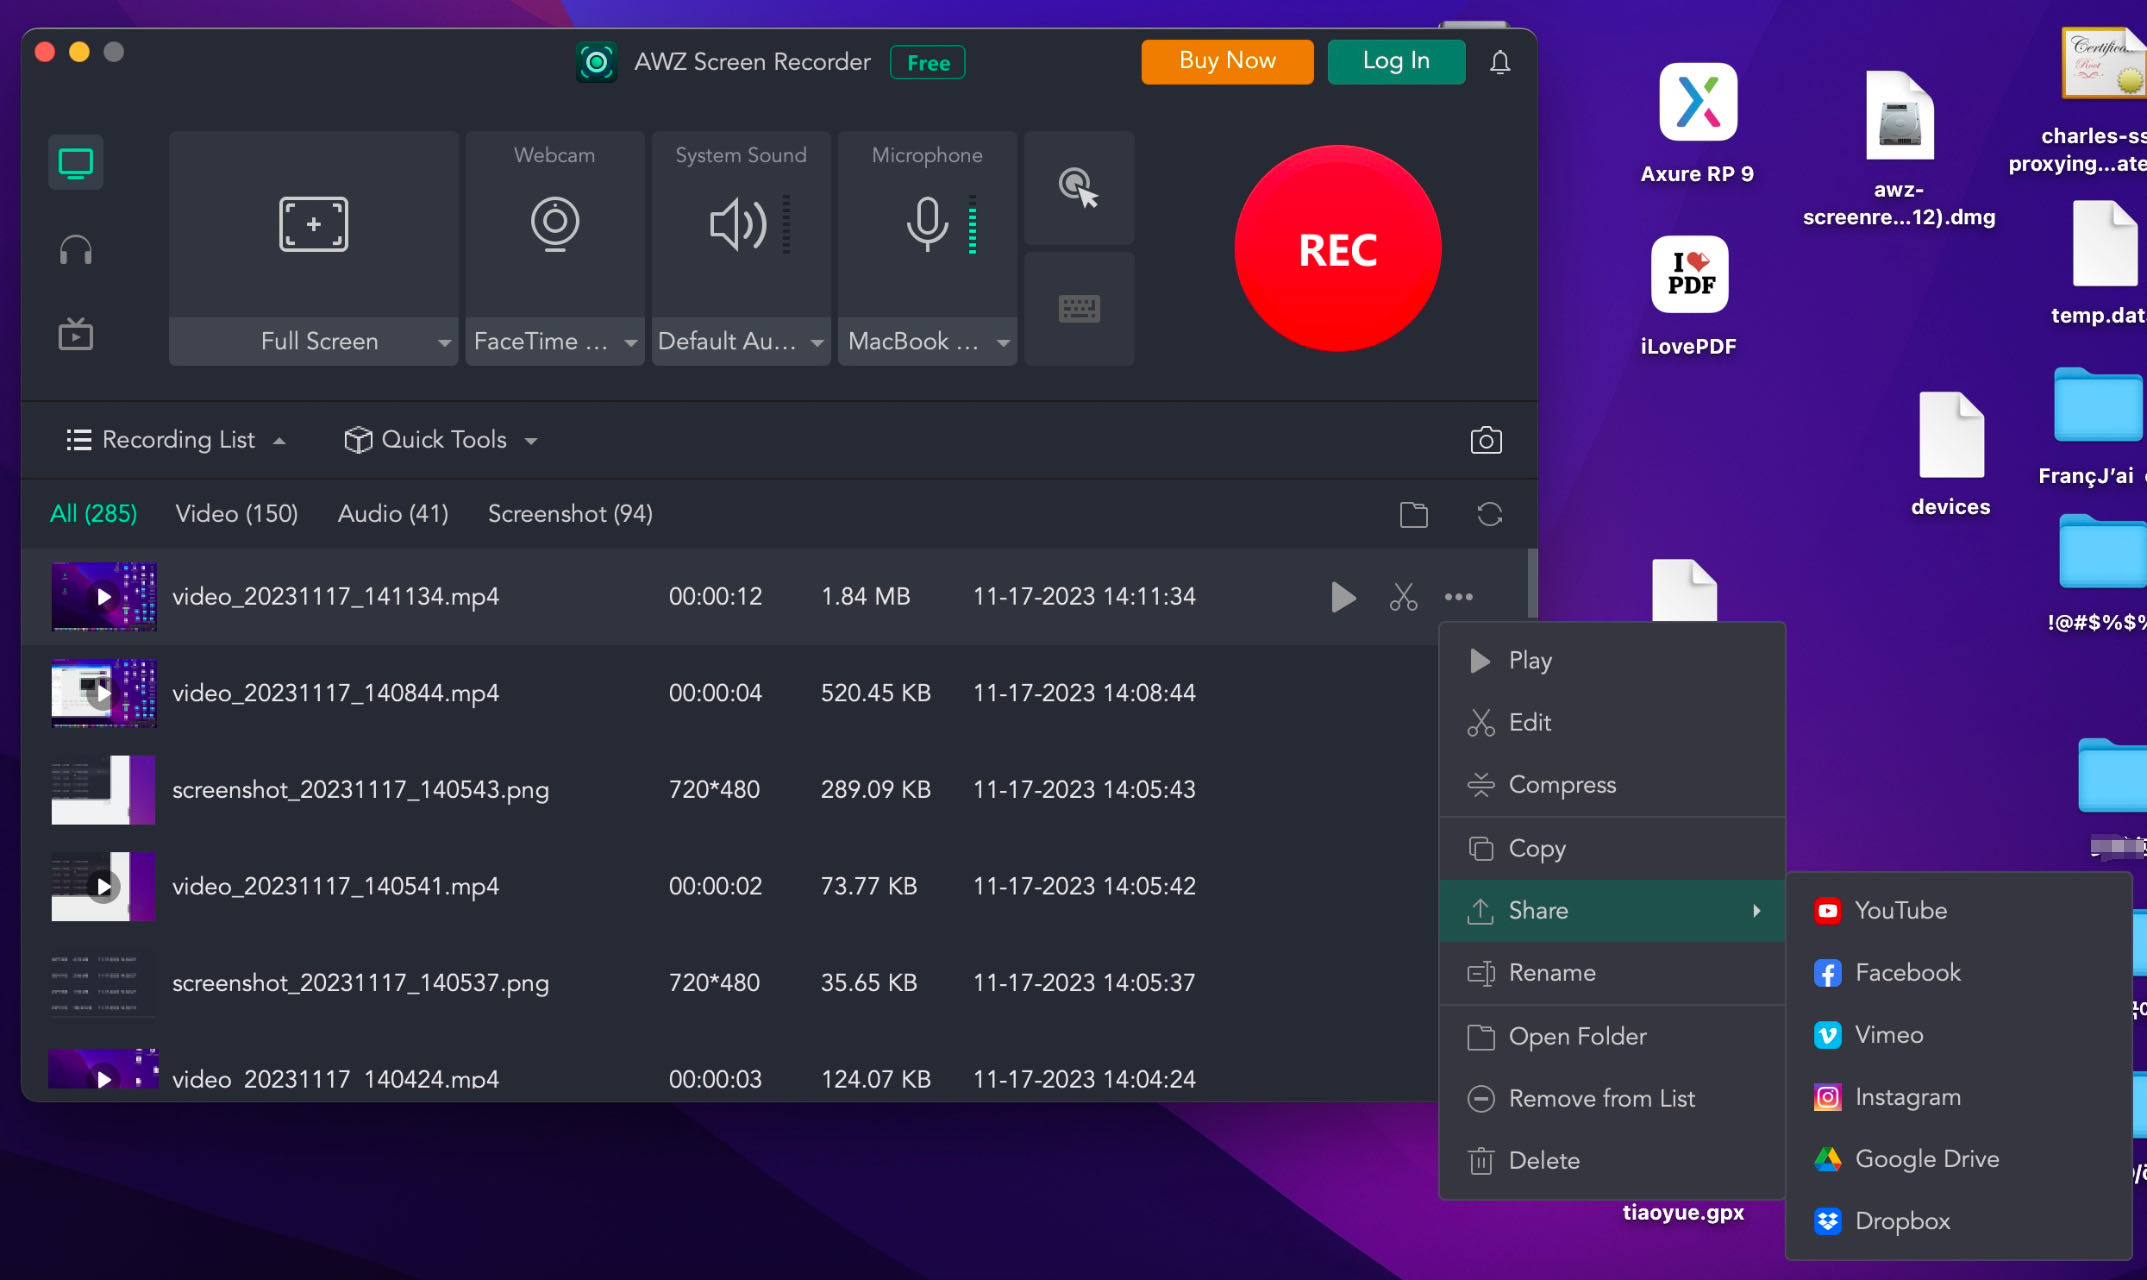 Share Recordings Directly in AWZ Screen Recorder